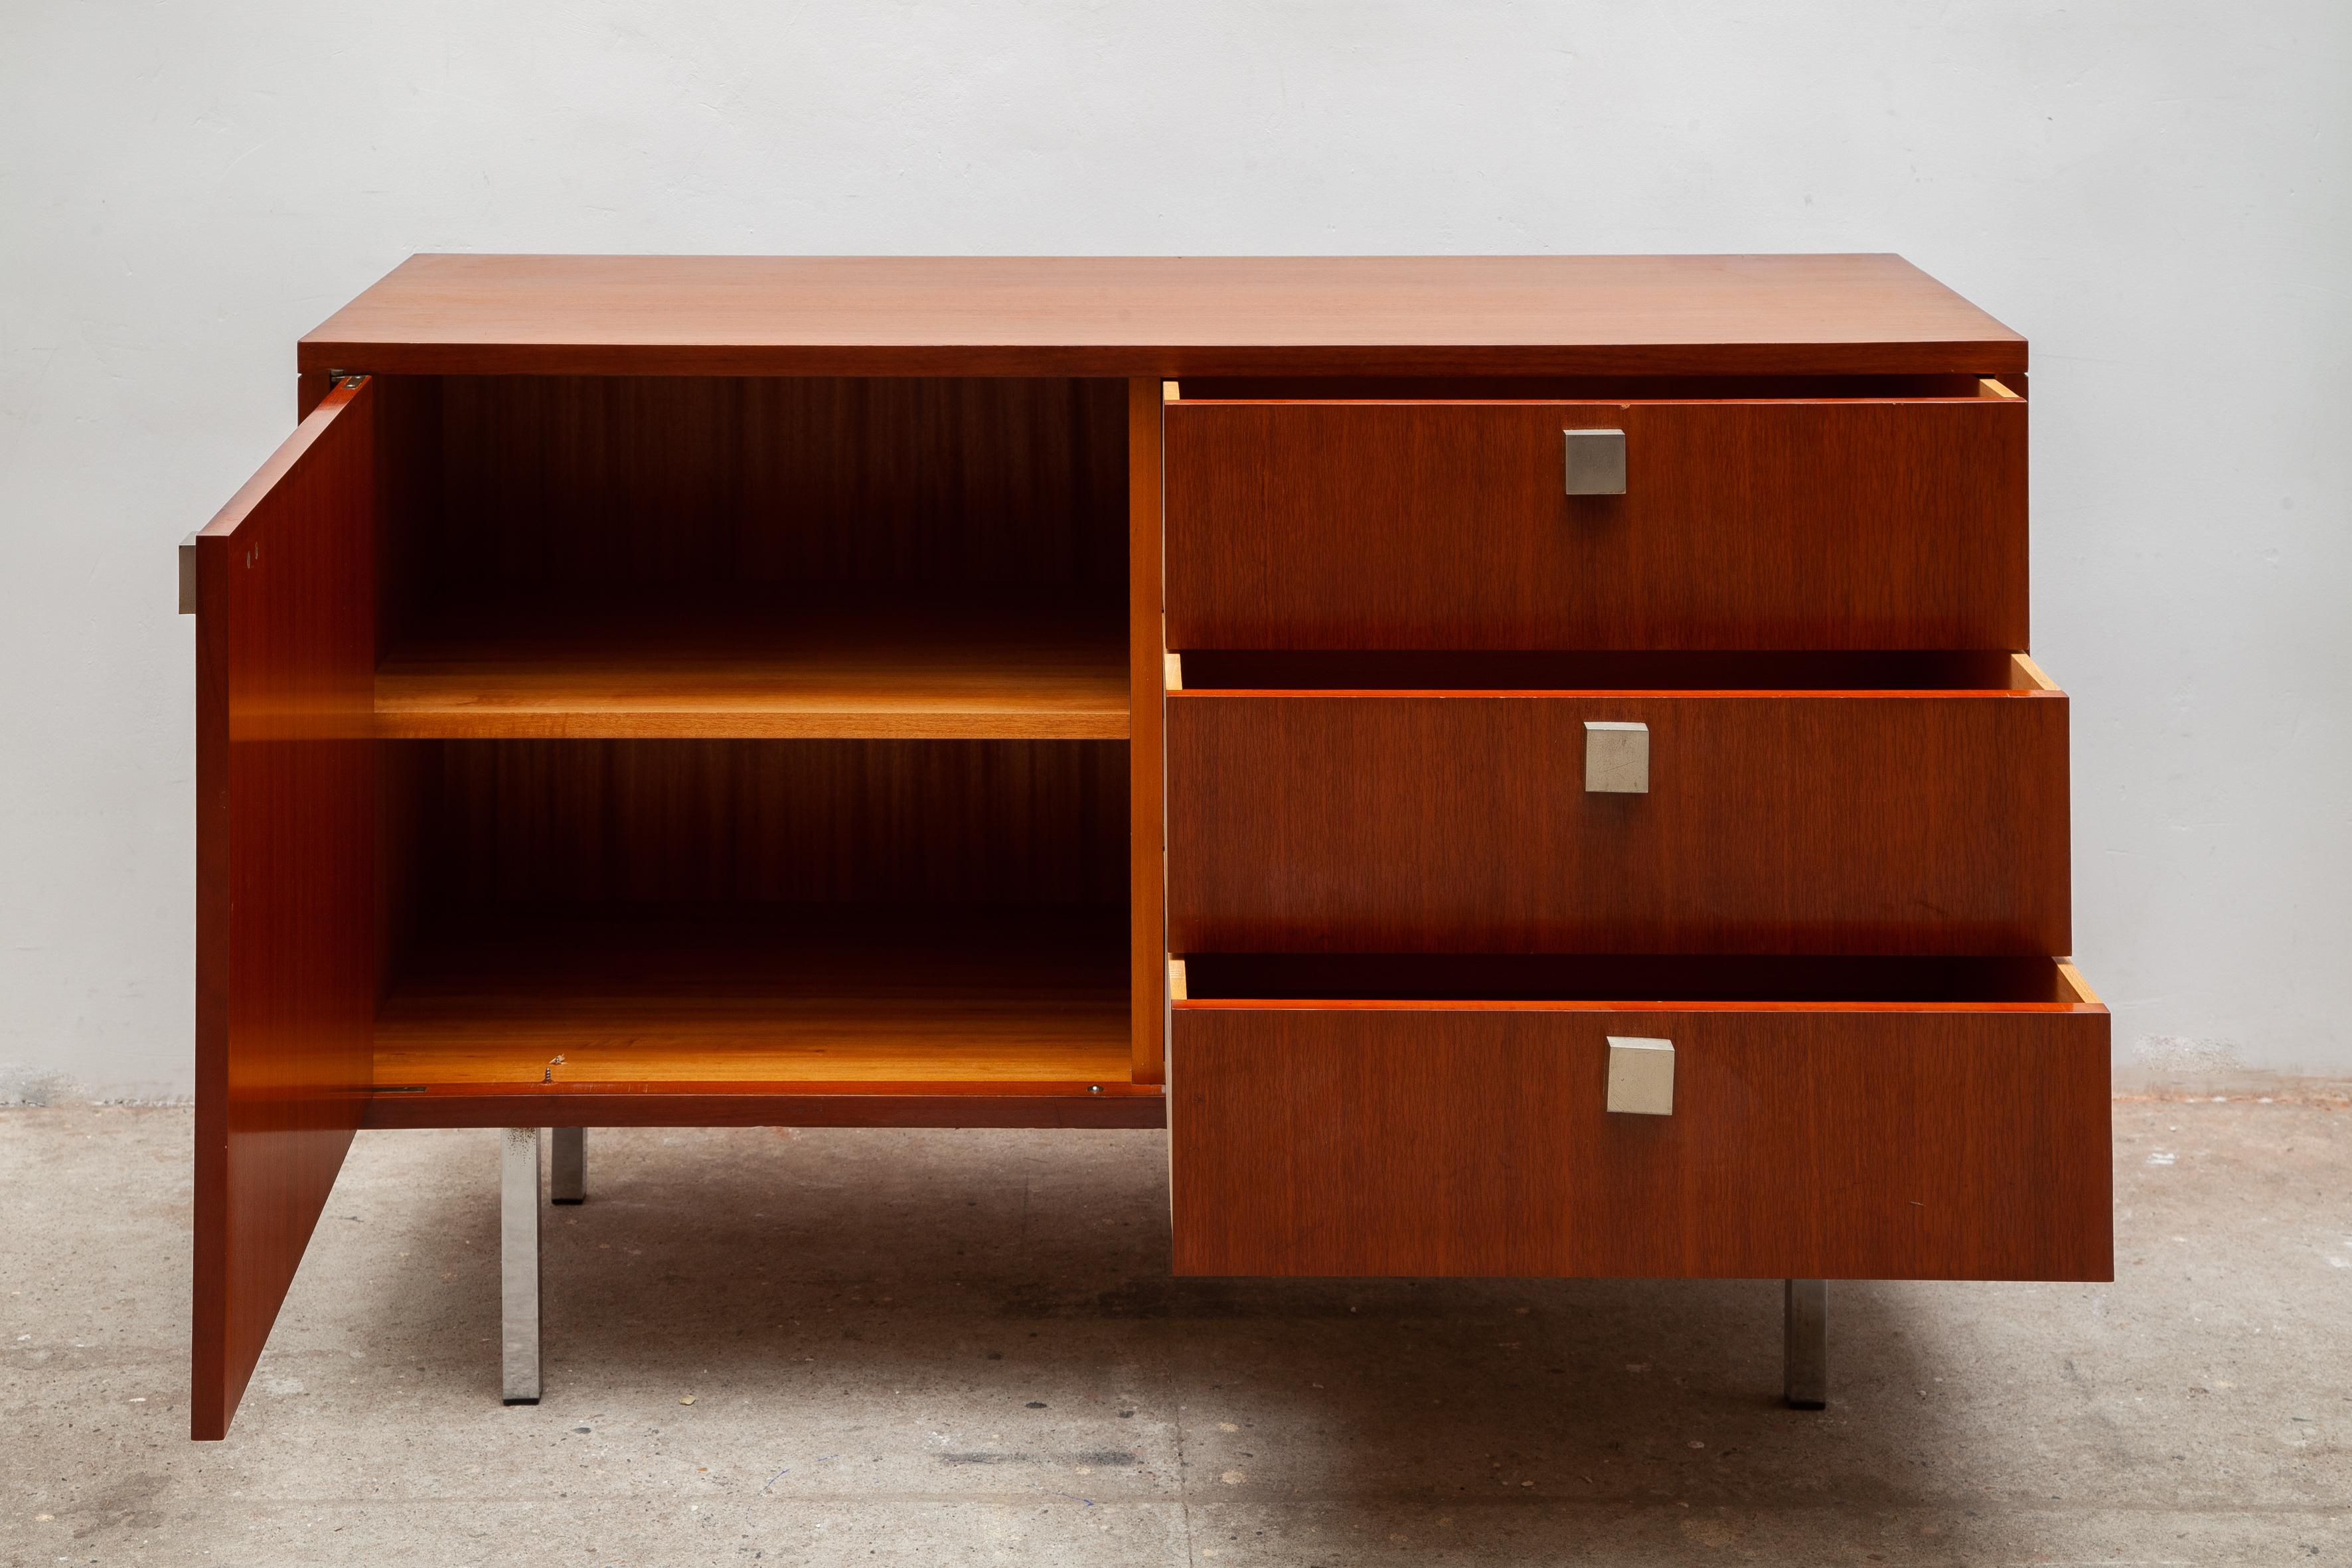 Hand-Crafted Minimalist Alfred Hendrickx Small Sideboard for Belform, Belgium 1962 For Sale